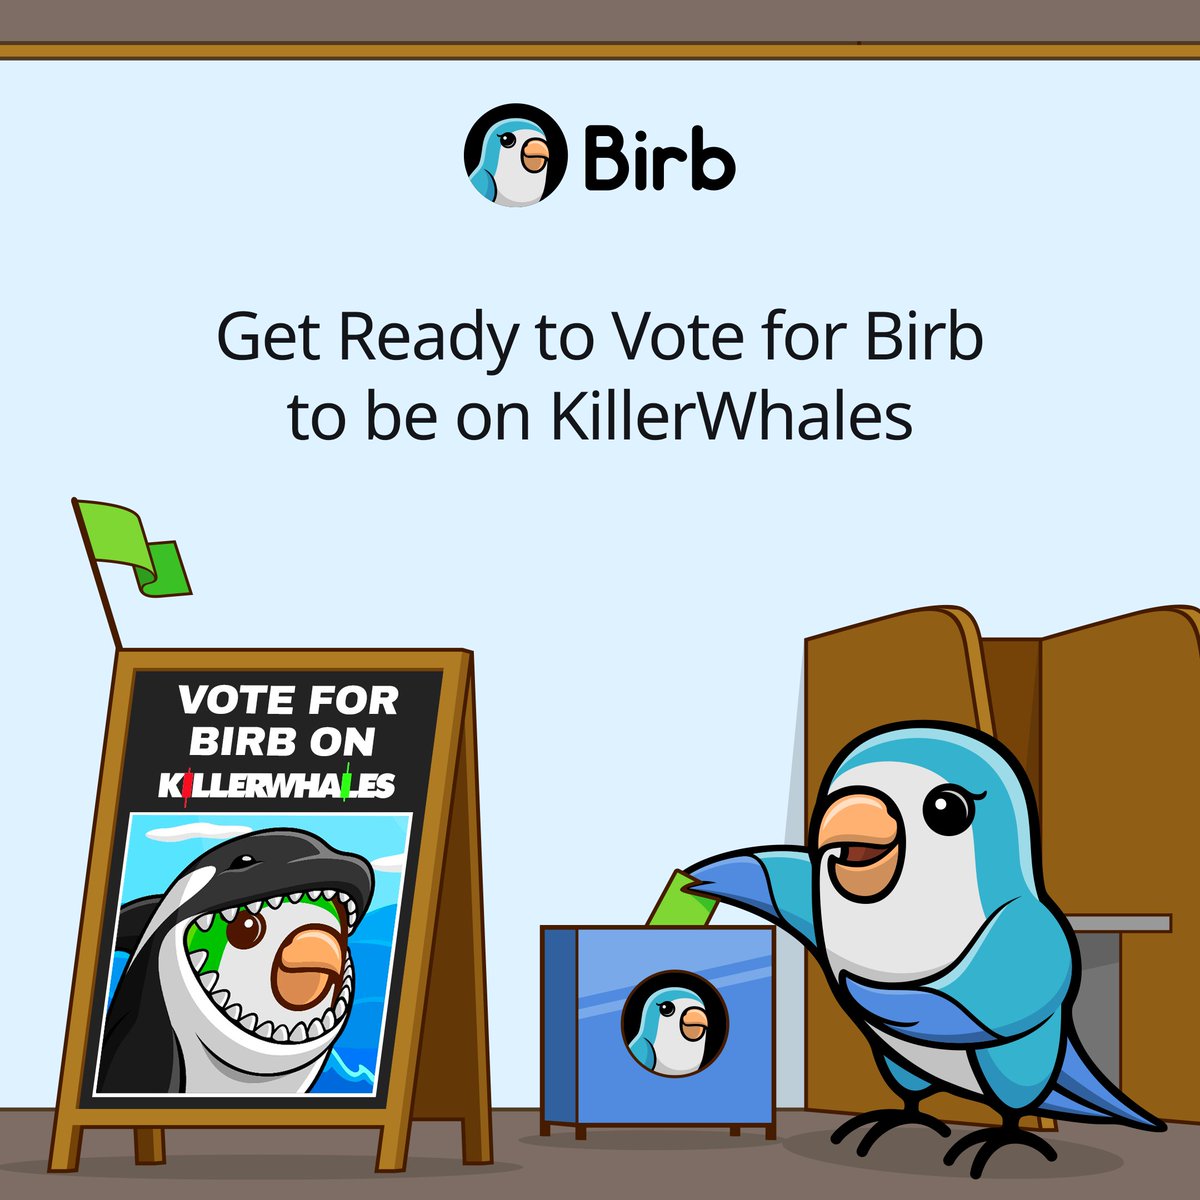 @thehellolabs @KillerWhalesTV 🎉 The $BIRB community is all geared up and buzzing with excitement! 🚀 We're ready to vote and thrilled for the chance to be on the #KillerWhalesTV show by @thehellolabs! Let's make some noise and show our spirit! 🐦👏 #VoteBIRB #CommunityPower